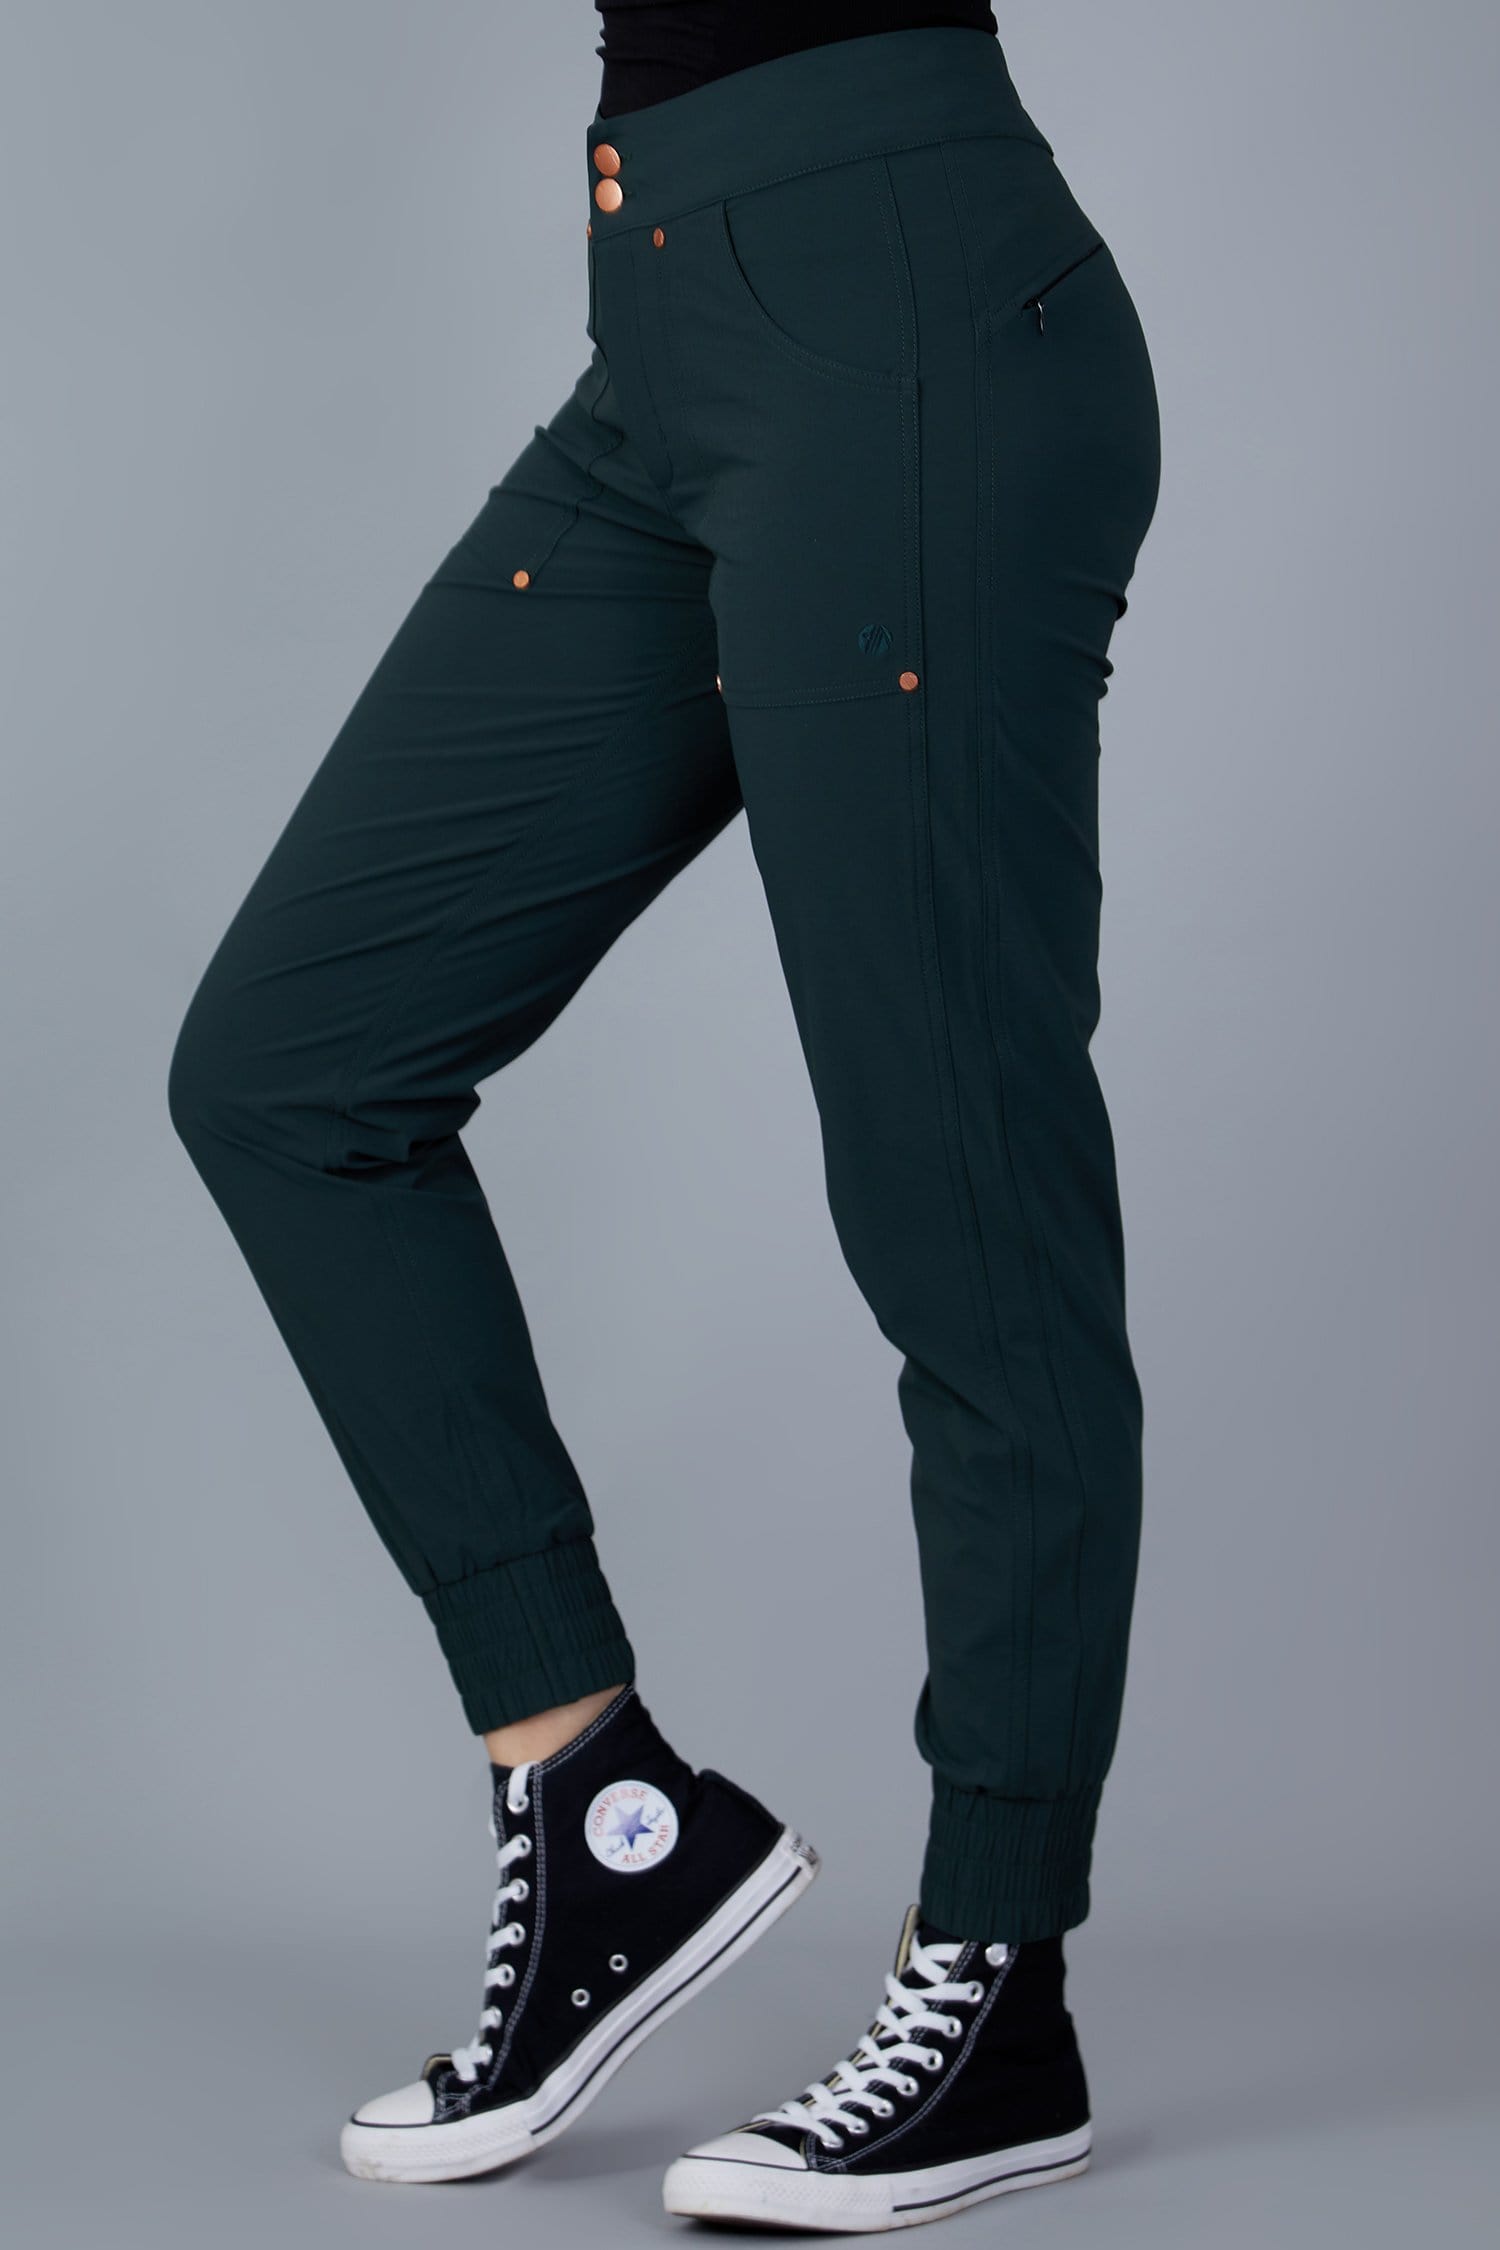 Casual Stroll Pants - Forest Green - 30r / Uk12 - Womens - Acai Outdoorwear